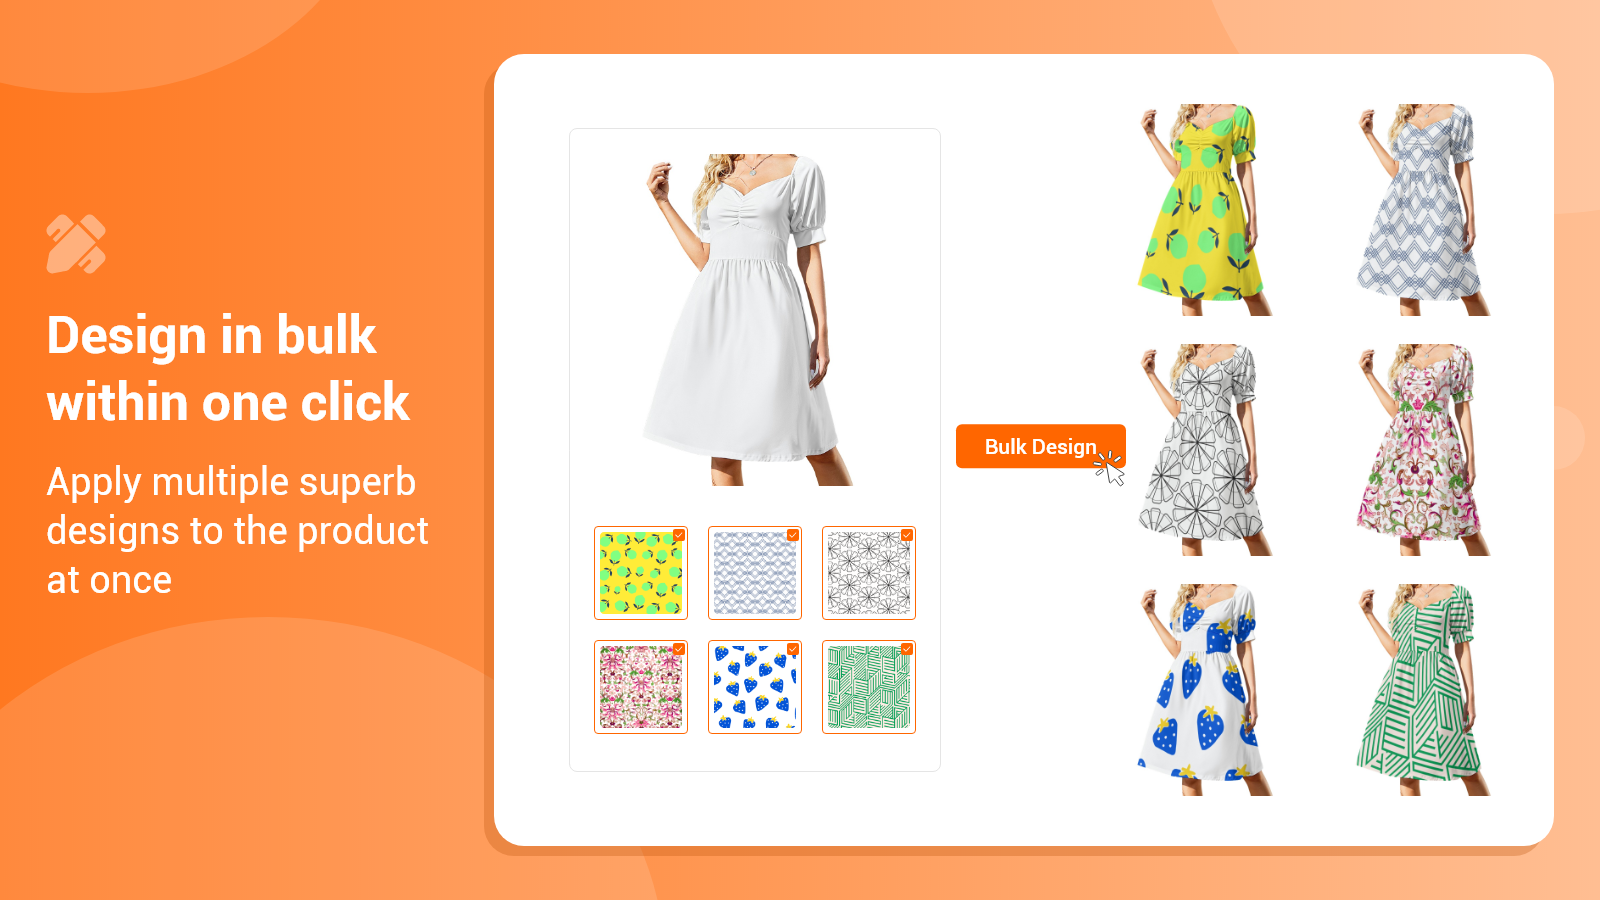 Bulk design feature allows you to create products in bulk